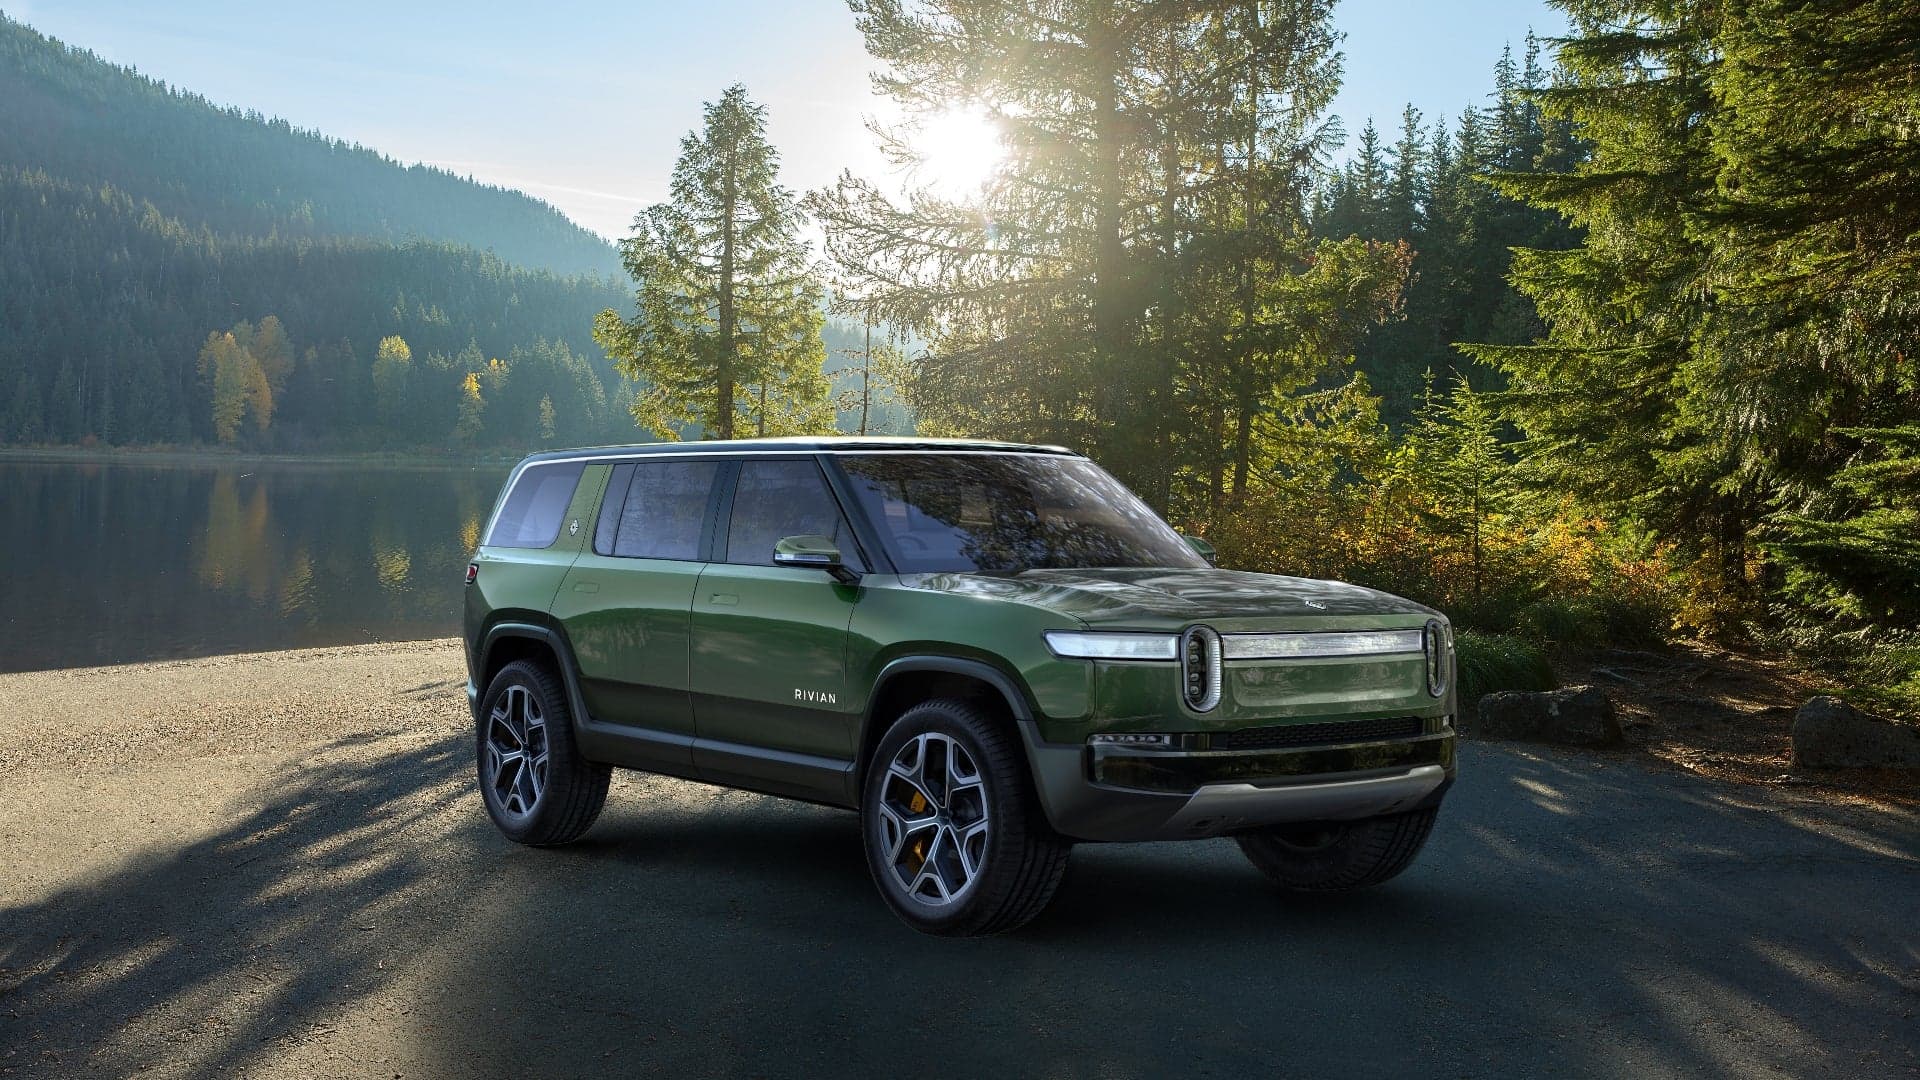 Rivian Confirms $700M Investment Round Led by Amazon for Electric Truck, SUV Production